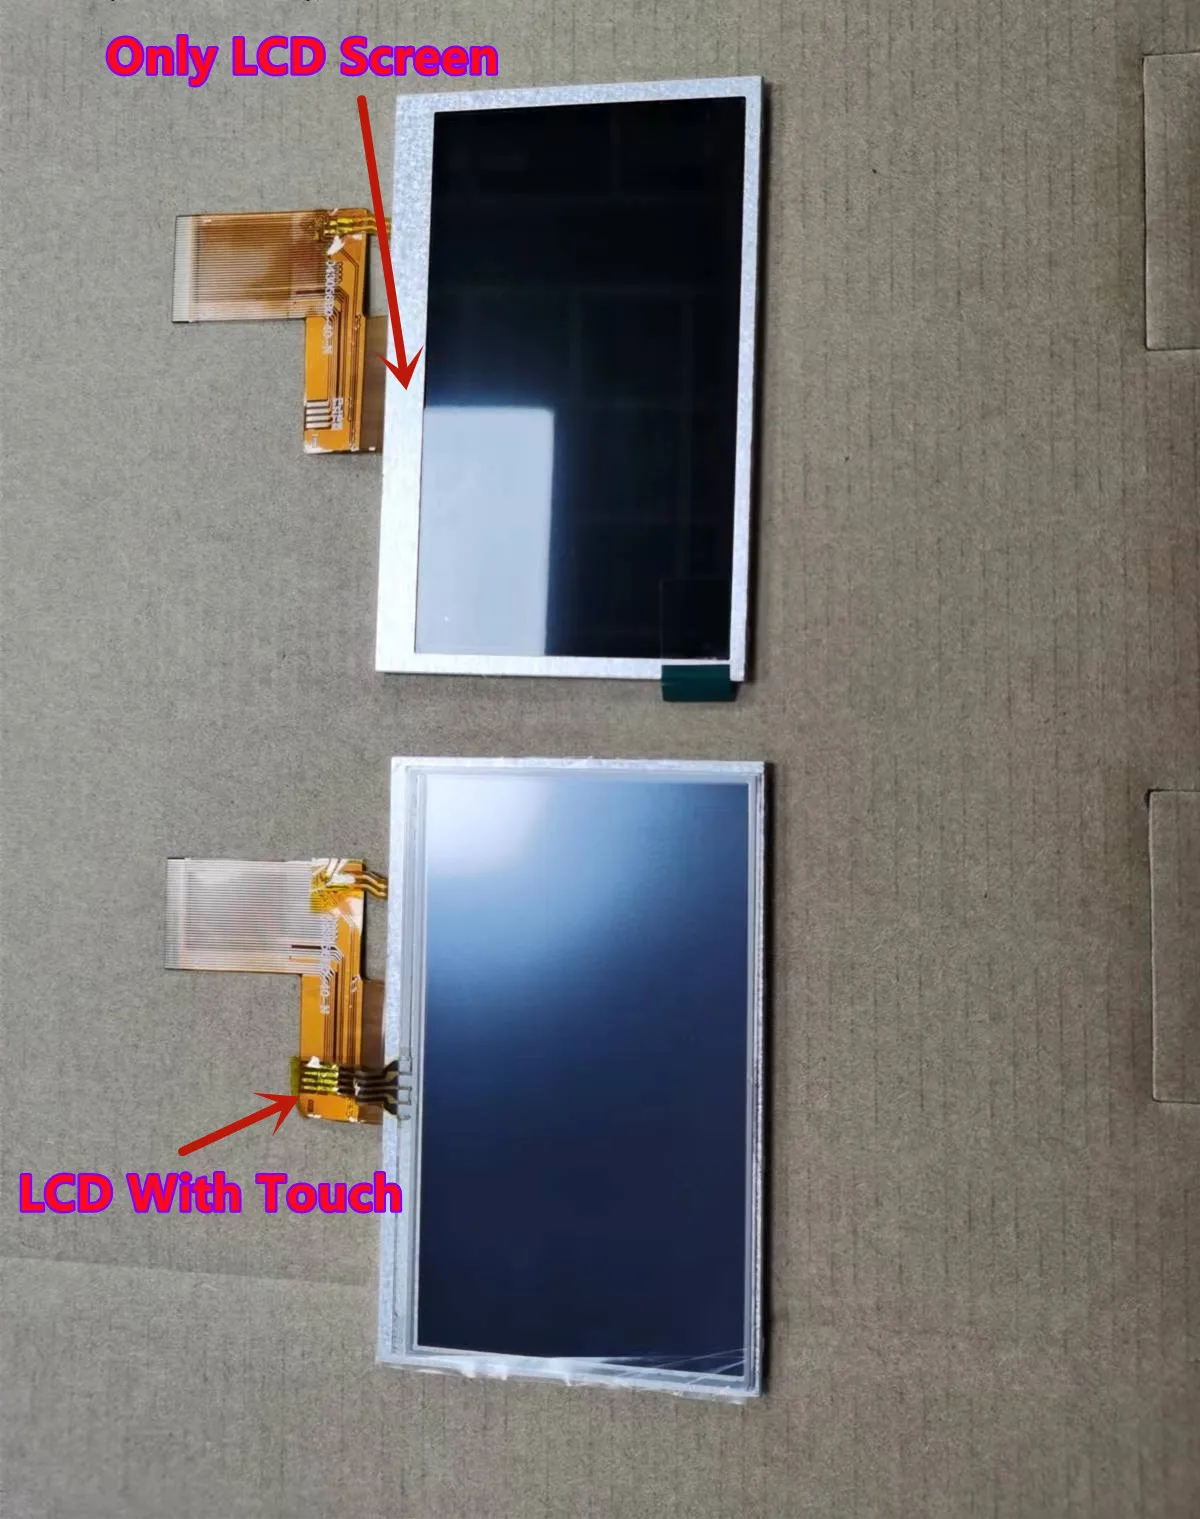 For 4.3 inch 40 Pin TFT LCD Display With Touch Common Screen GL043056B0-40 HD430B0-24 043056B0-40 GL04303600-40 ZNL043T702-P40